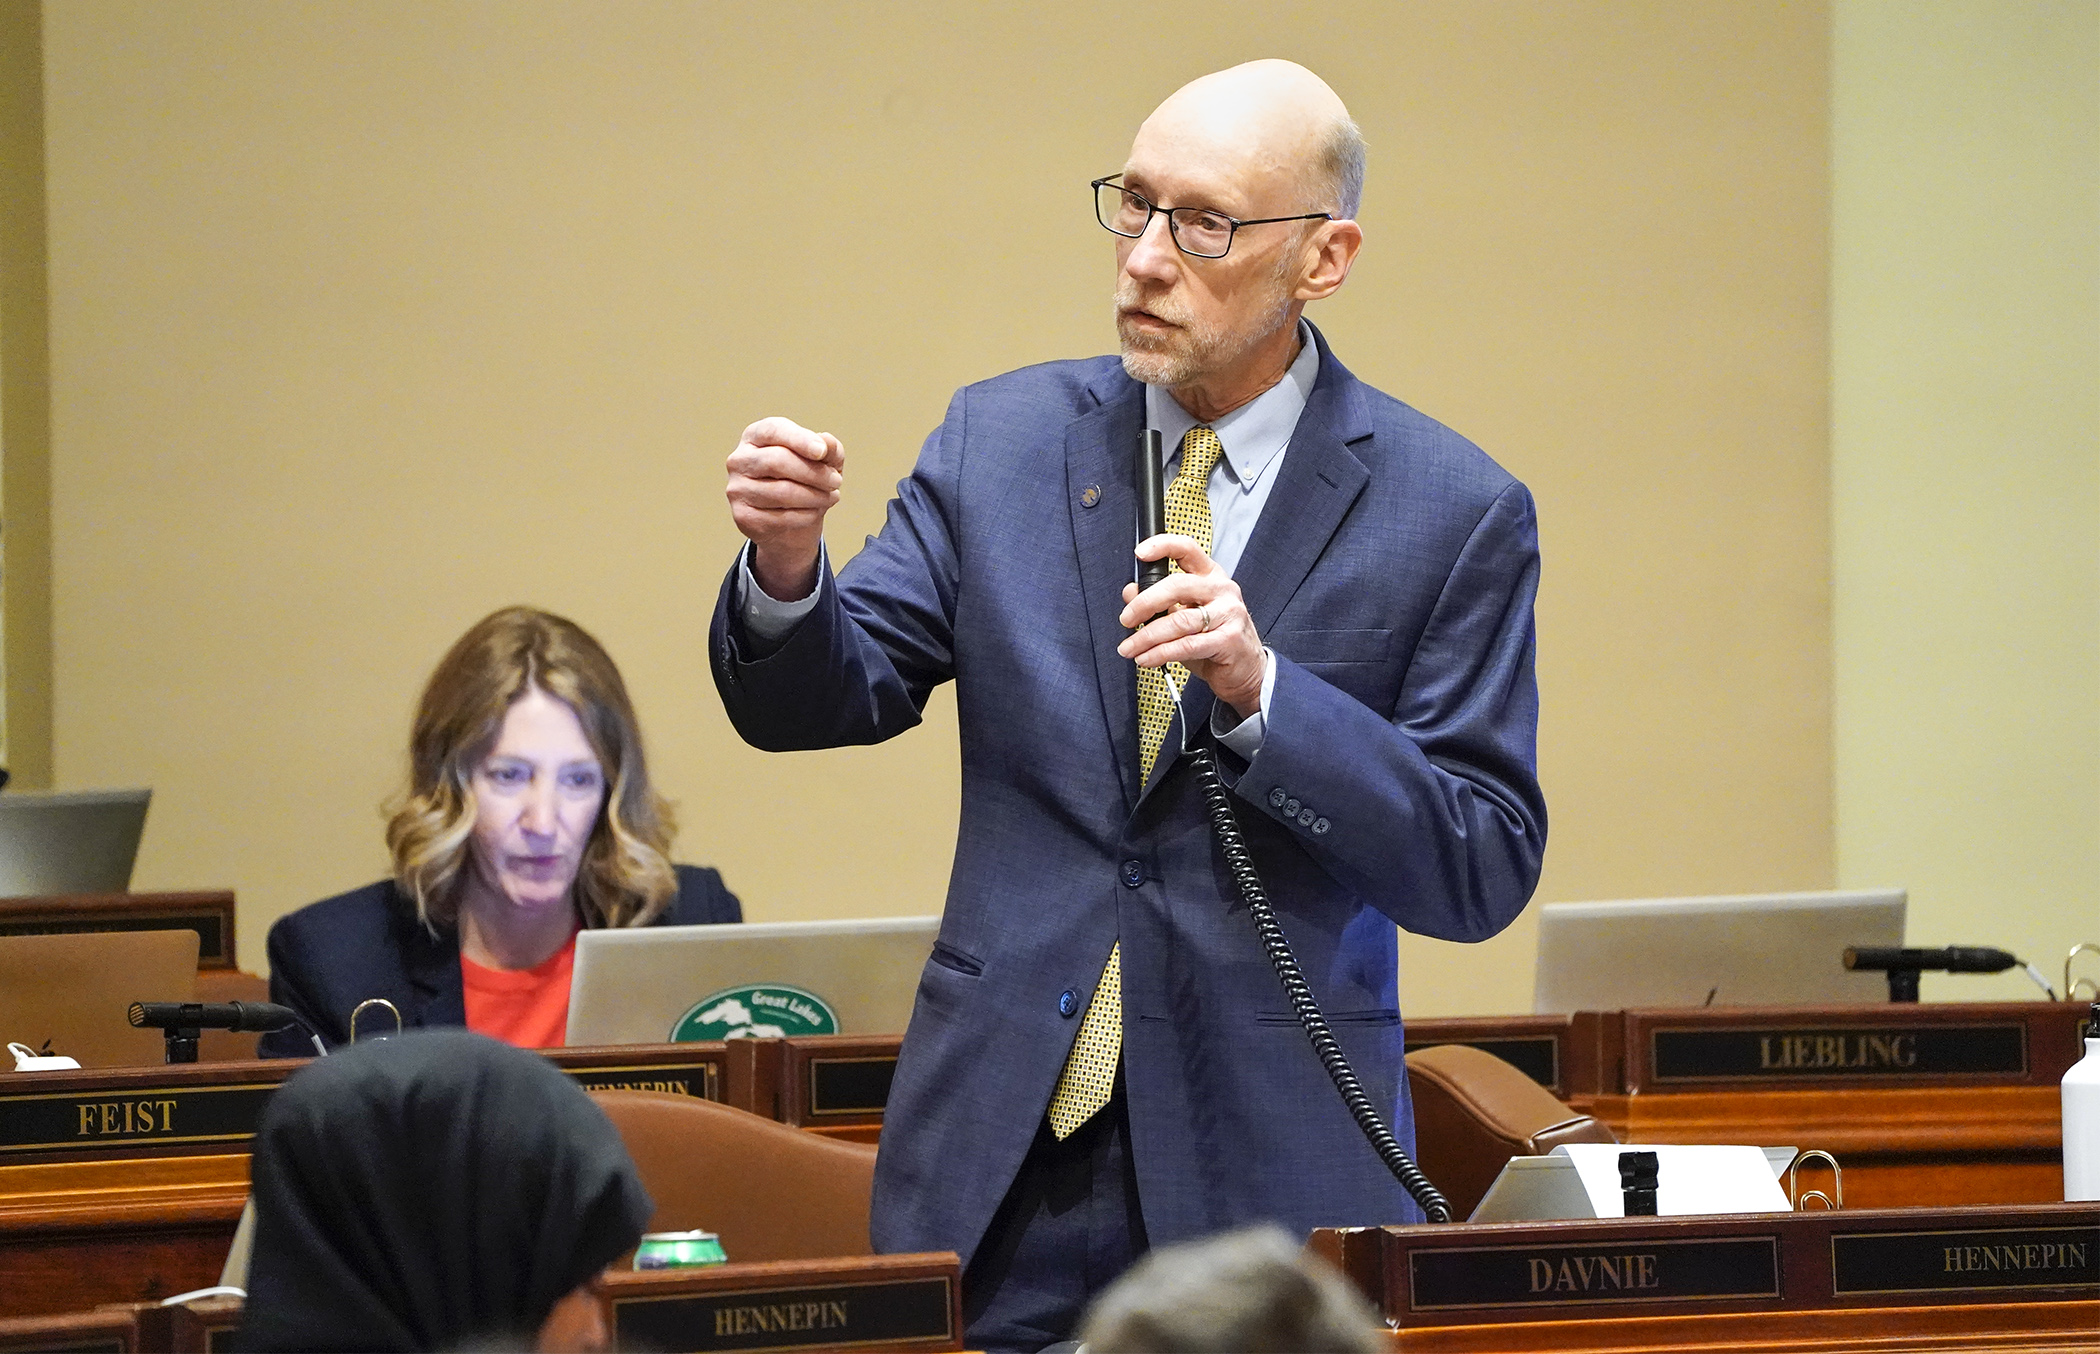 Rep. Jim Davnie, chair of the House Education Finance Committee, makes opening comments before debate begins on the omnibus supplemental education finance and policy bill April 27. (Photo by Paul Battaglia)